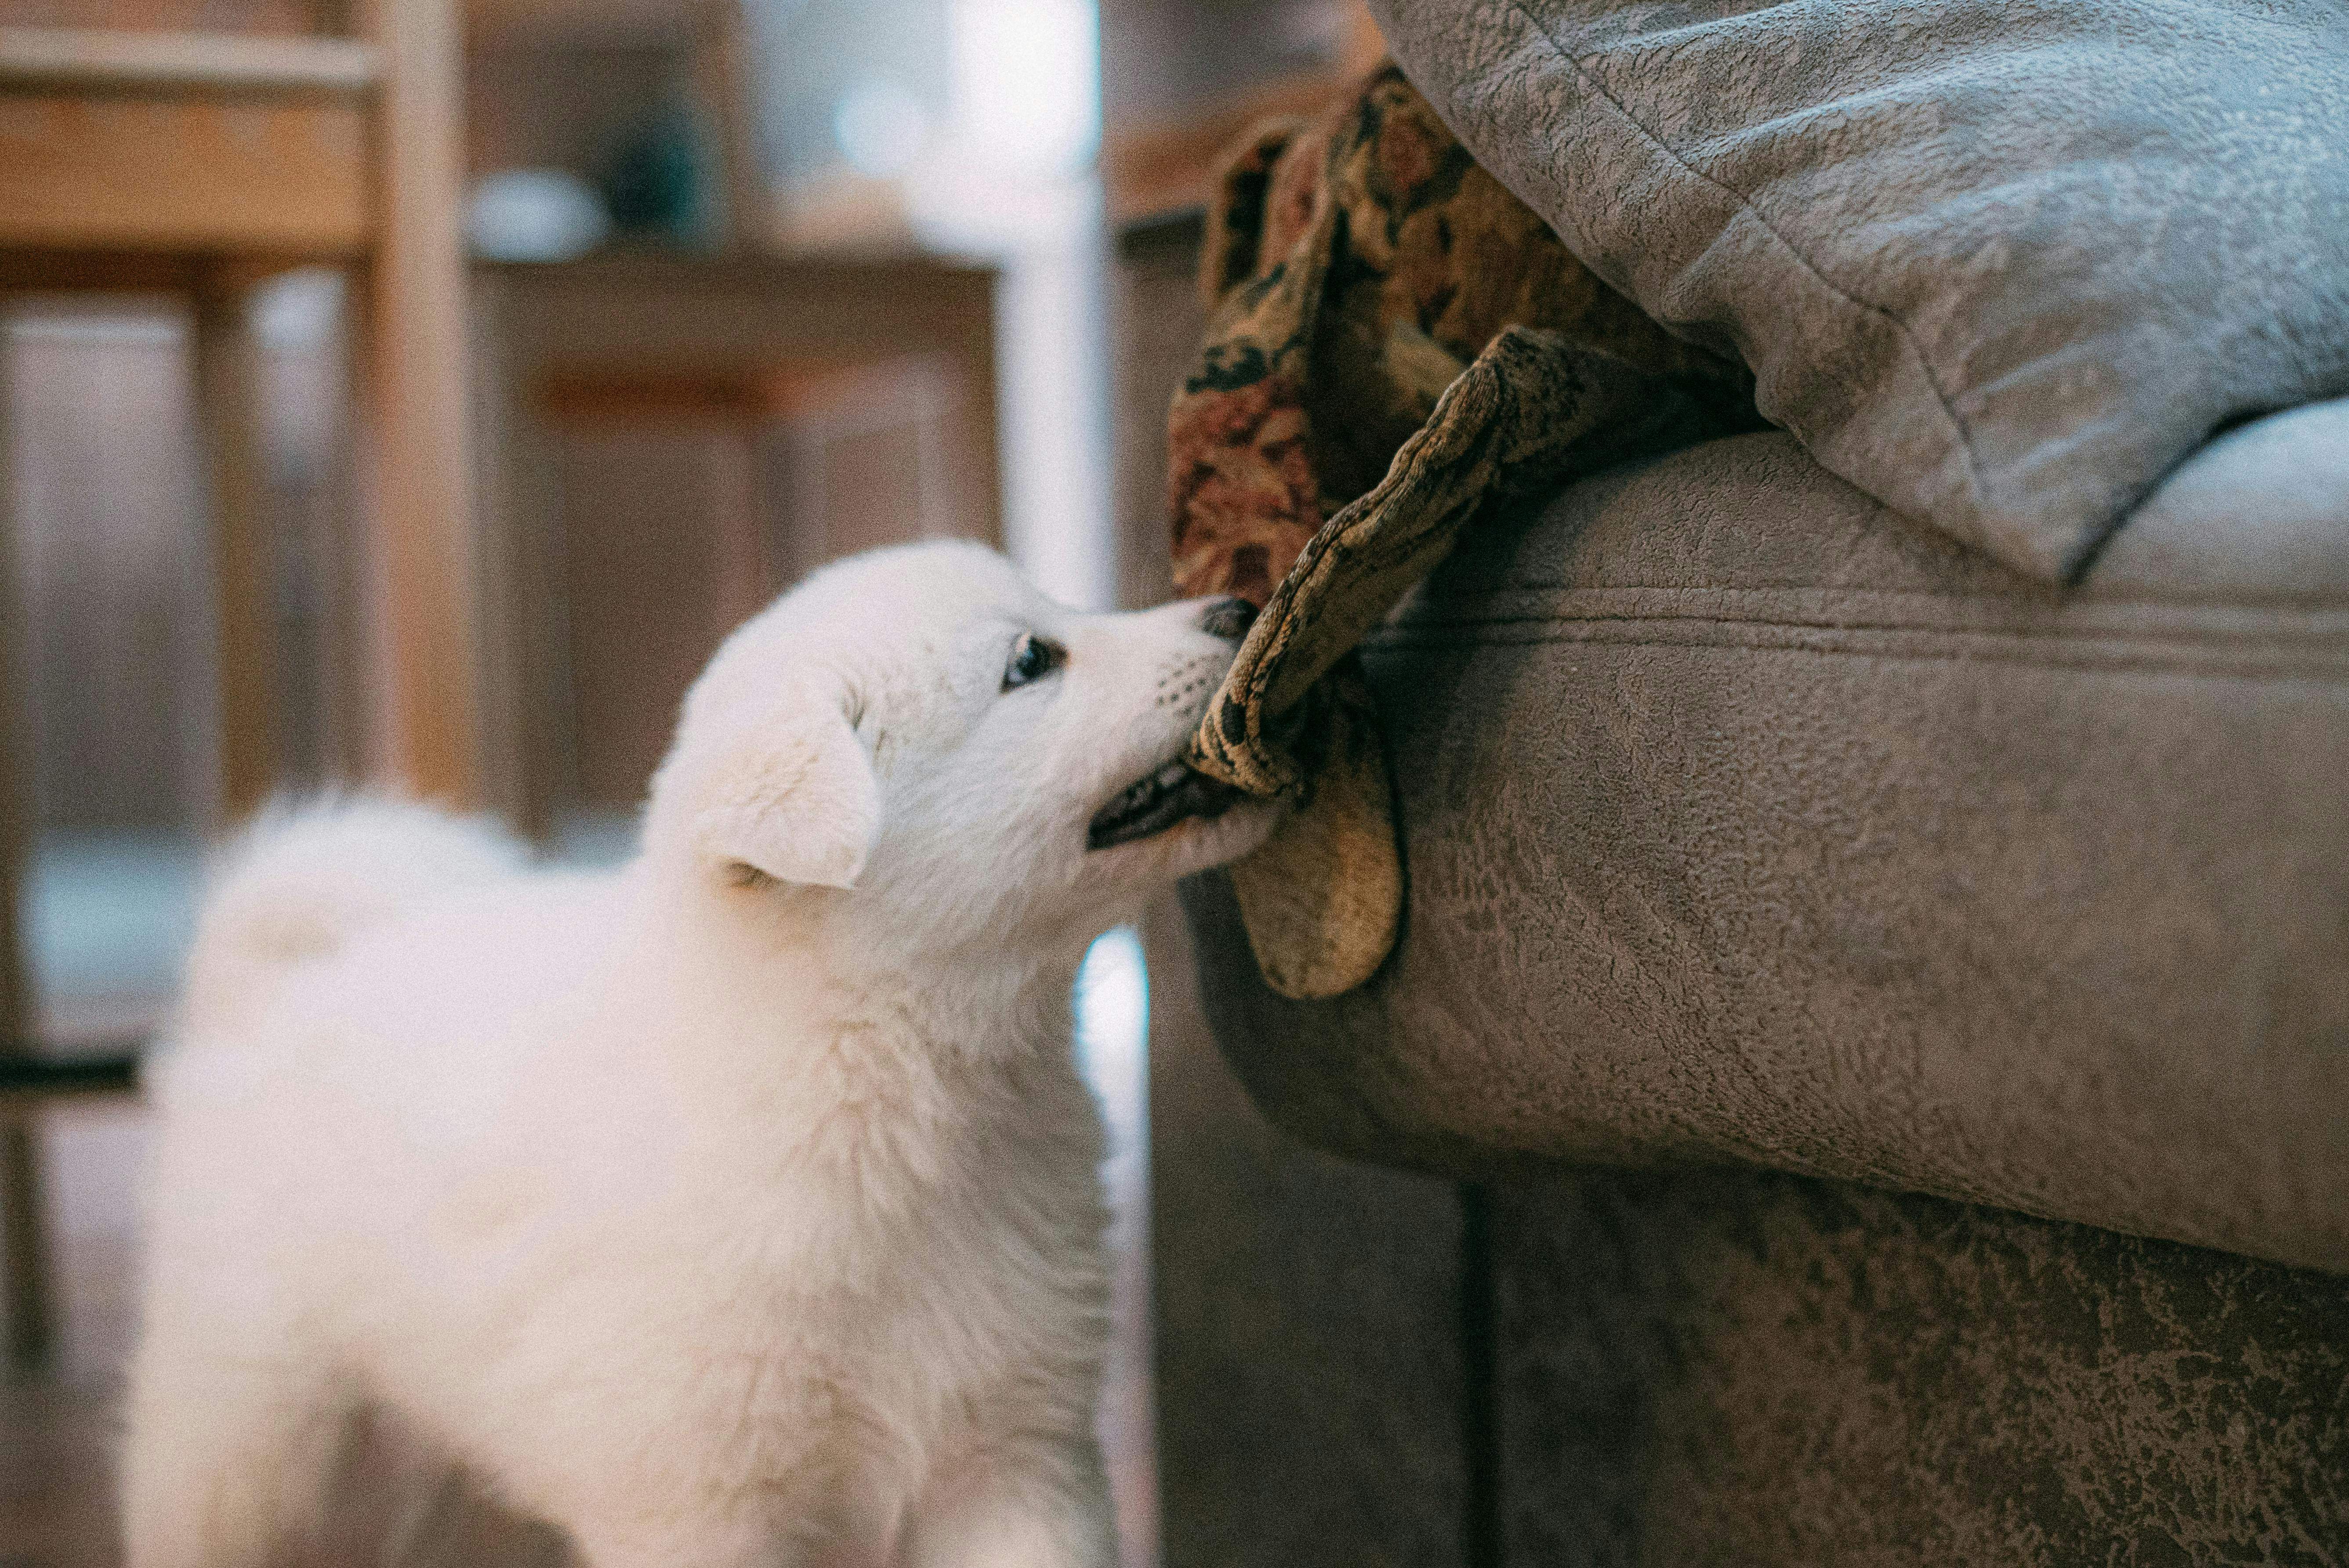 A white puppy tugs a blanket off a couch